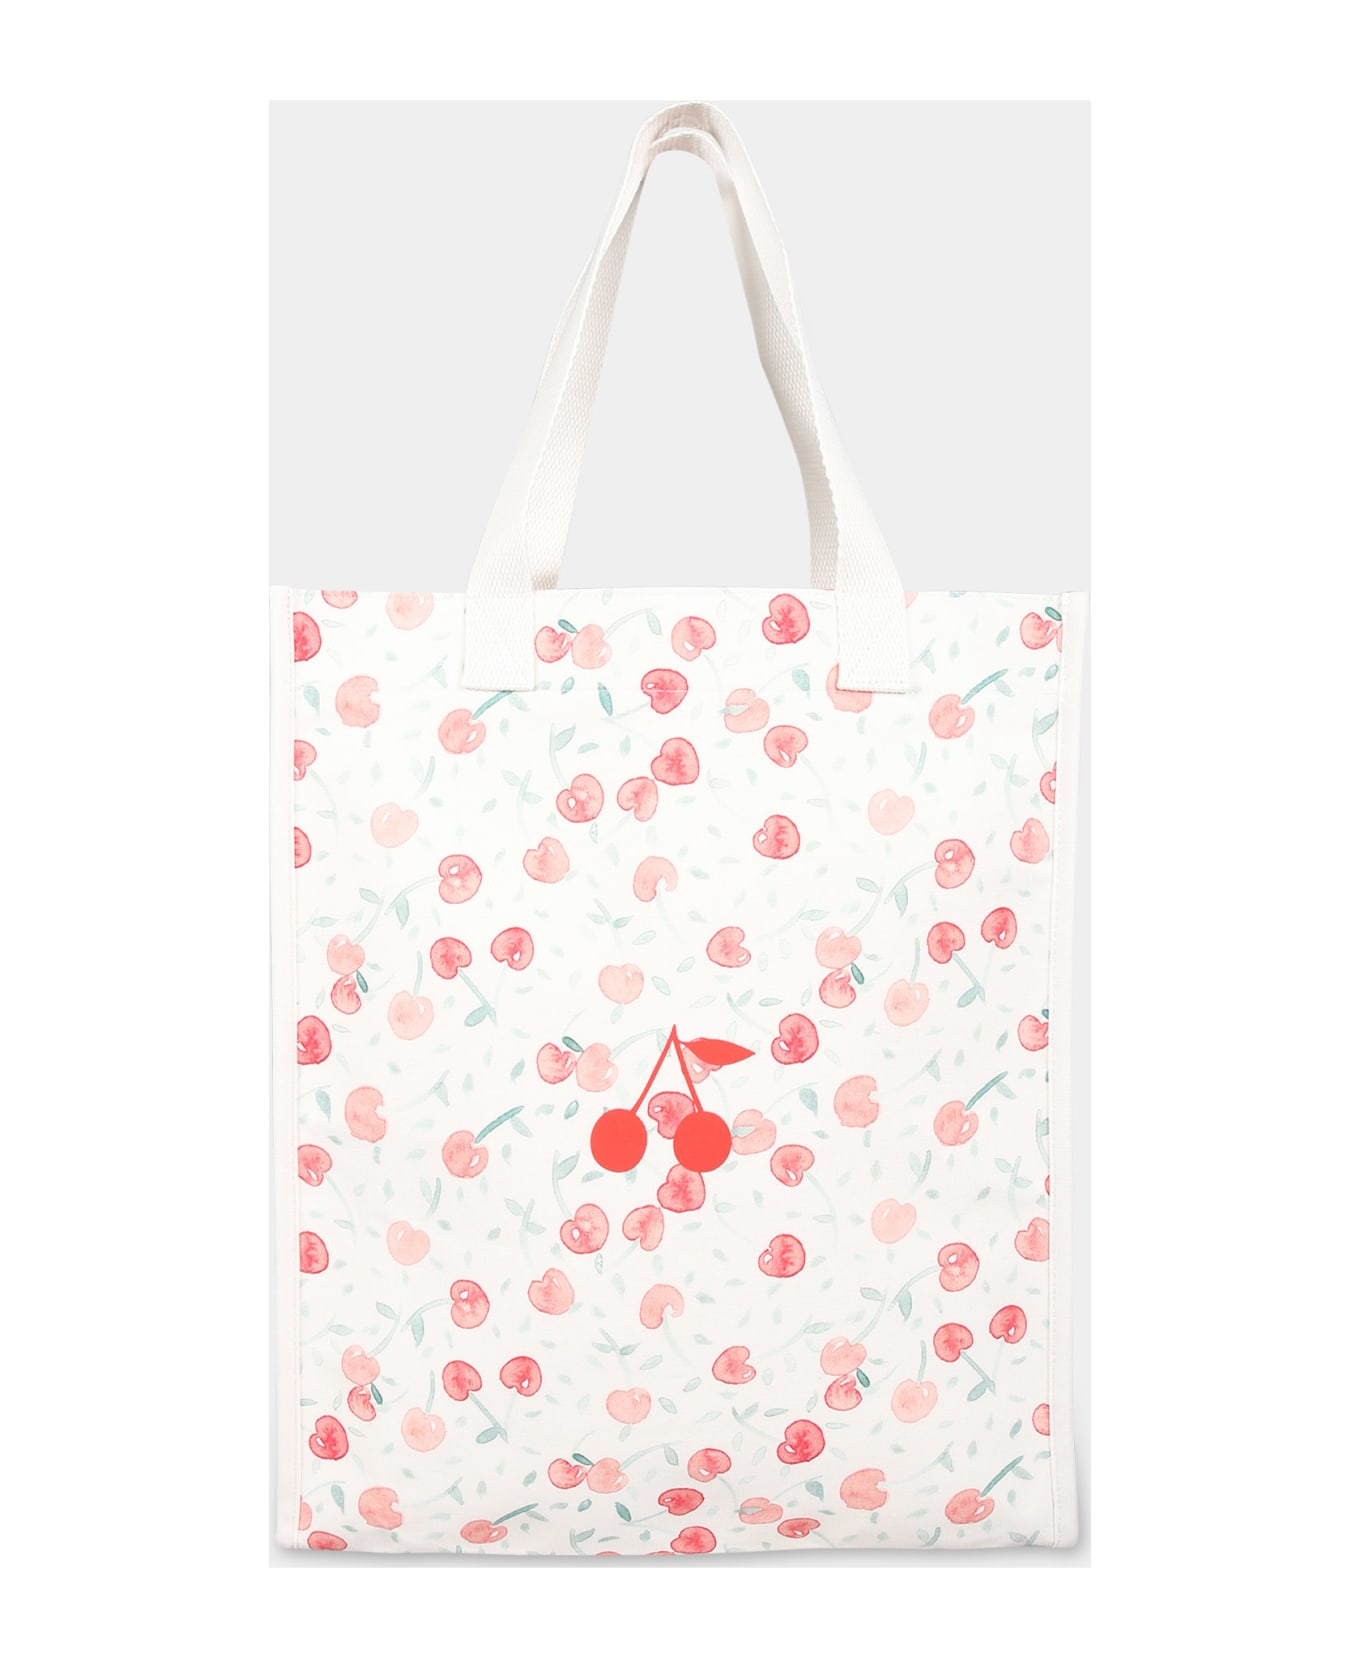 Bonpoint Ivory Bag For Girl With Iconic Cherries - WHITE